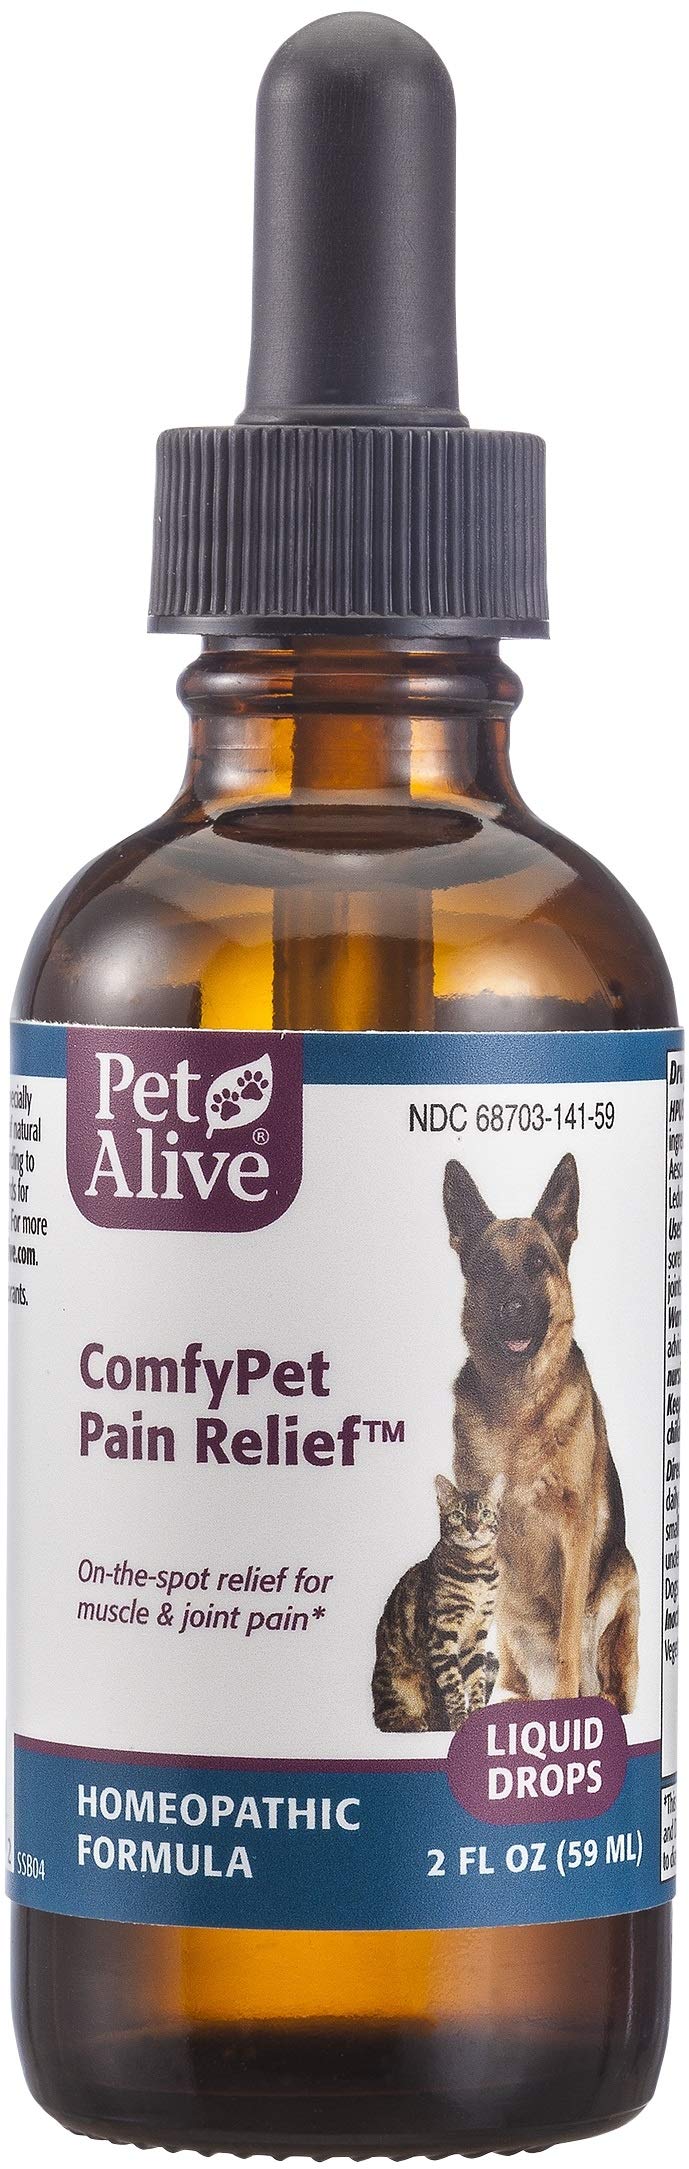 PetAlive ComfyPet Pain Relief - Natural Homeopathic Formula for Minor Aches and Pains in Dogs and Cats - Temporarily Reduces Minor Discomfort in The Muscles and Joints - 59 mL - PawsPlanet Australia